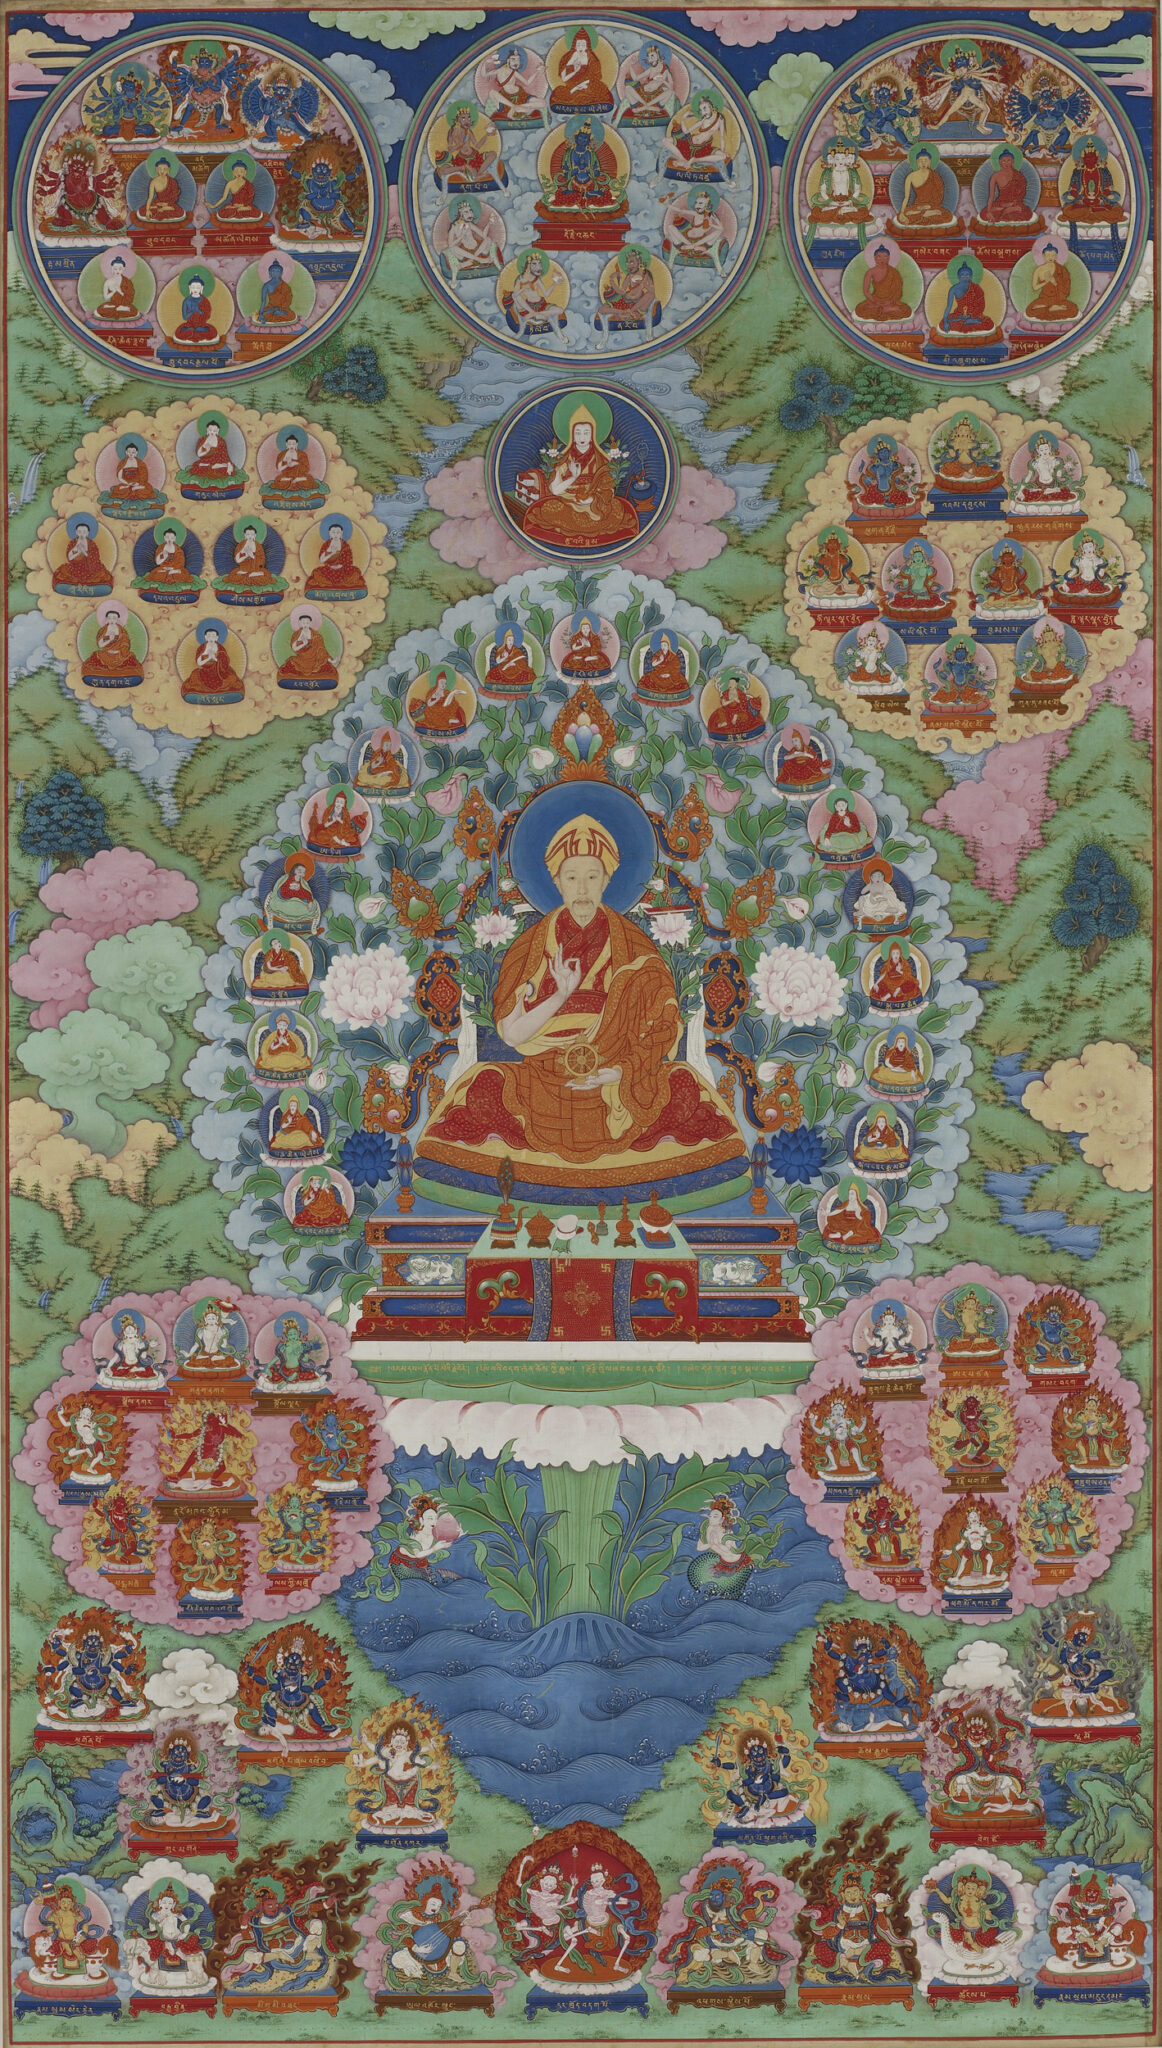 Hovering above mountainous landscape, four roundels inset with portraits surround central image of saffron-robed figure